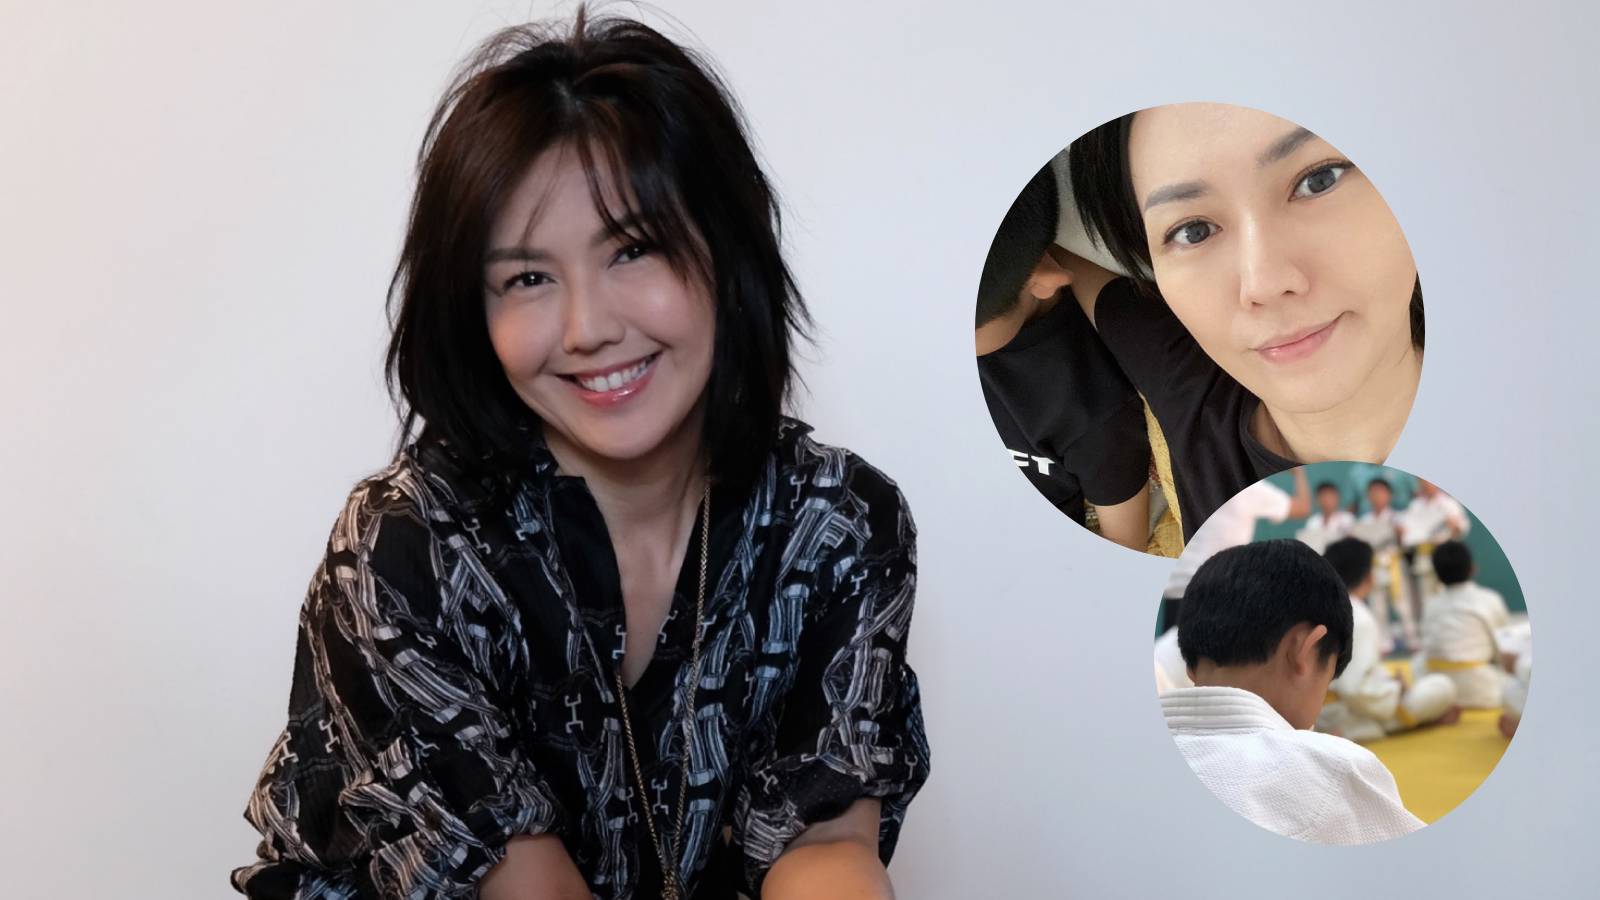 Stefanie Sun Gives Us A Tip On How To Identify Her Son In Public